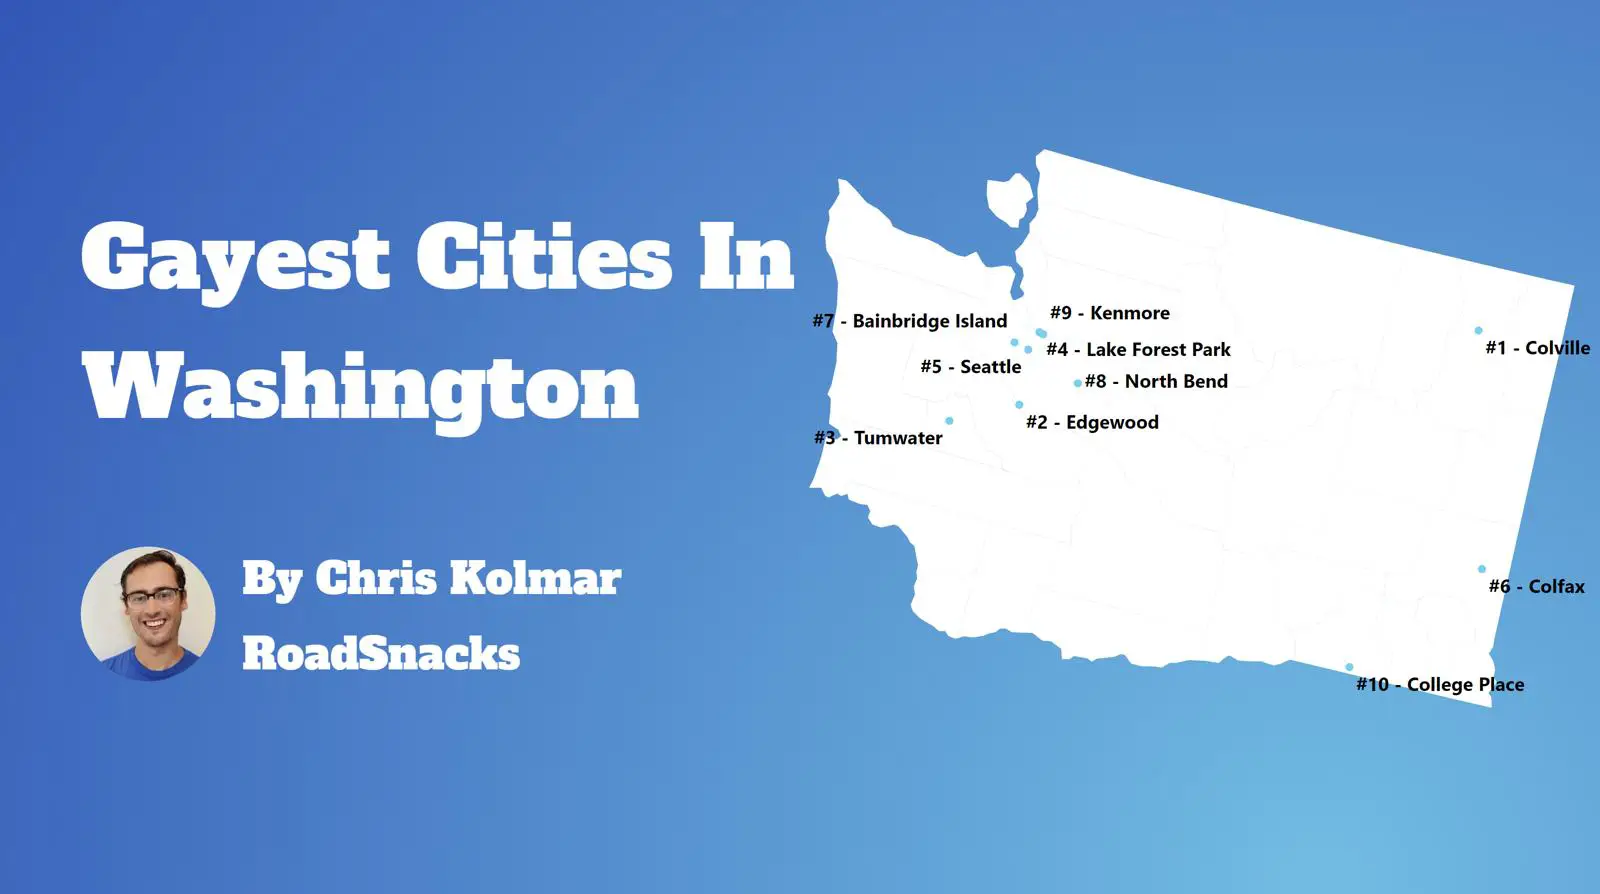 Gayest Cities In Washington Map